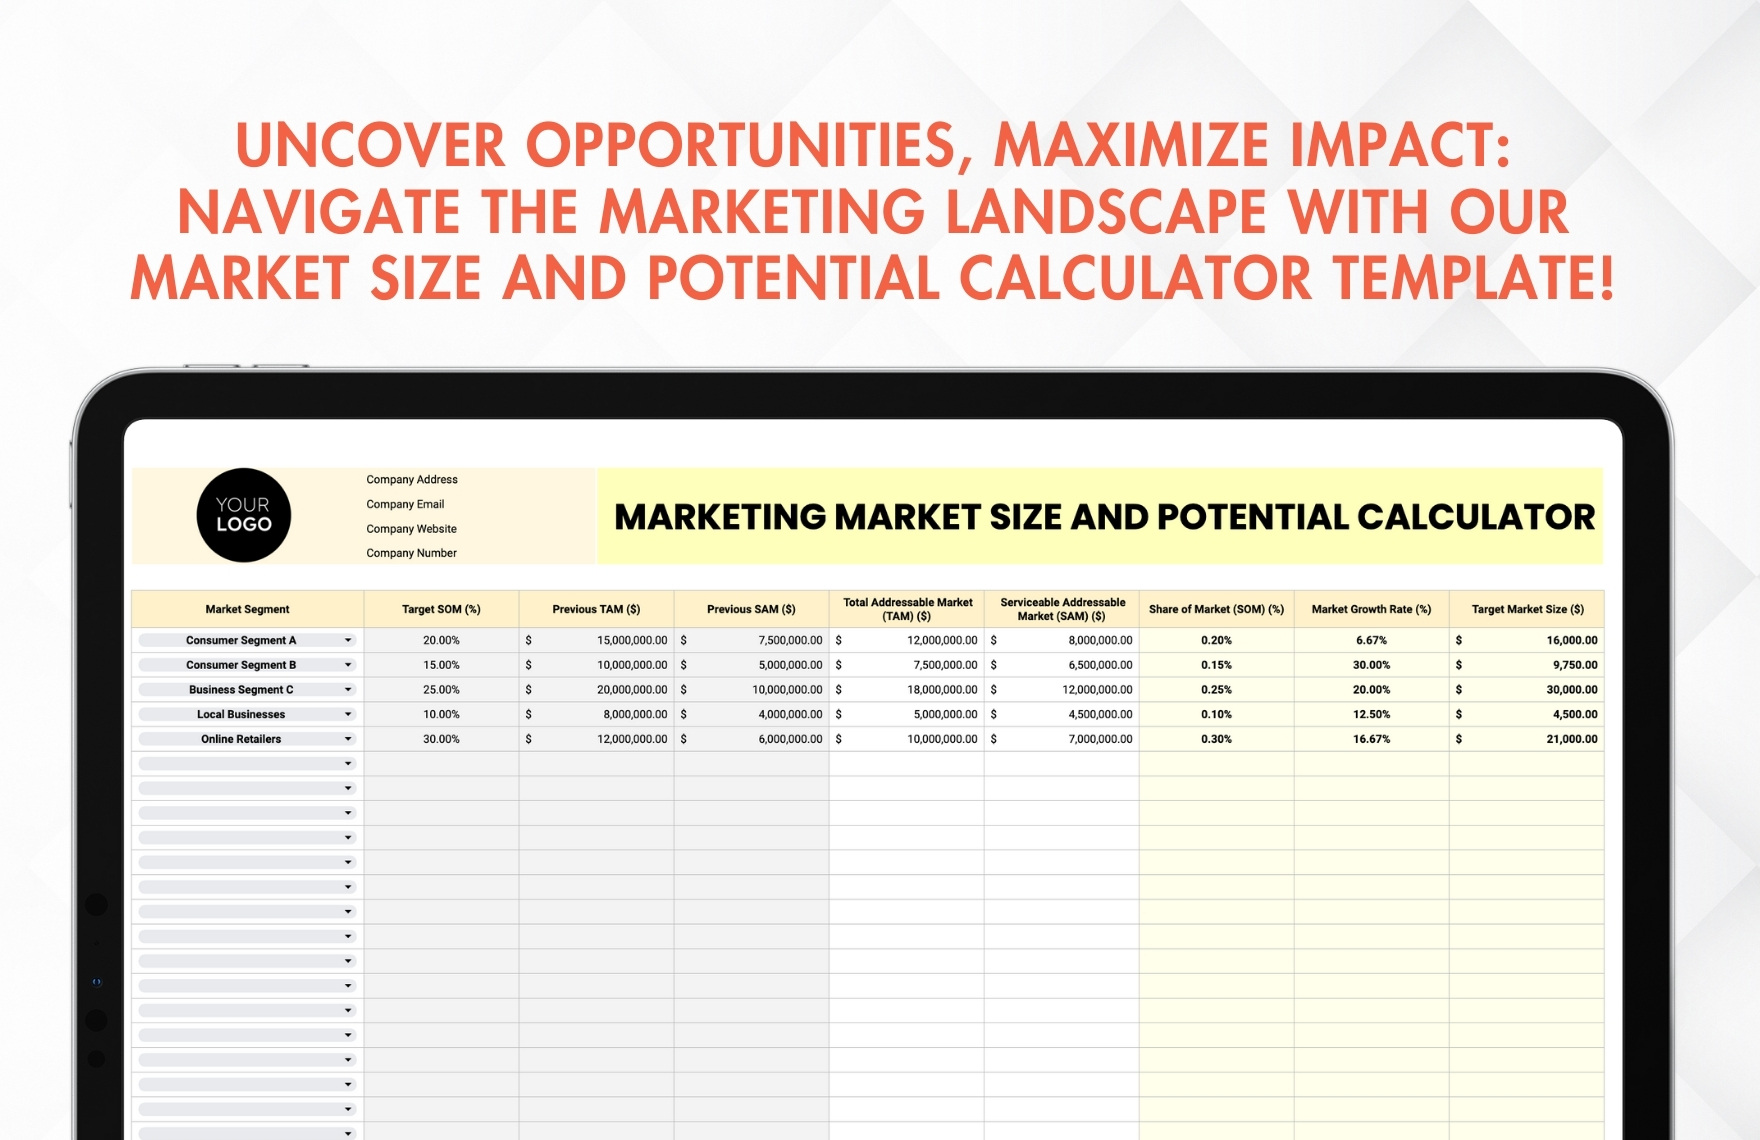 Marketing Market Size and Potential Calculator Template